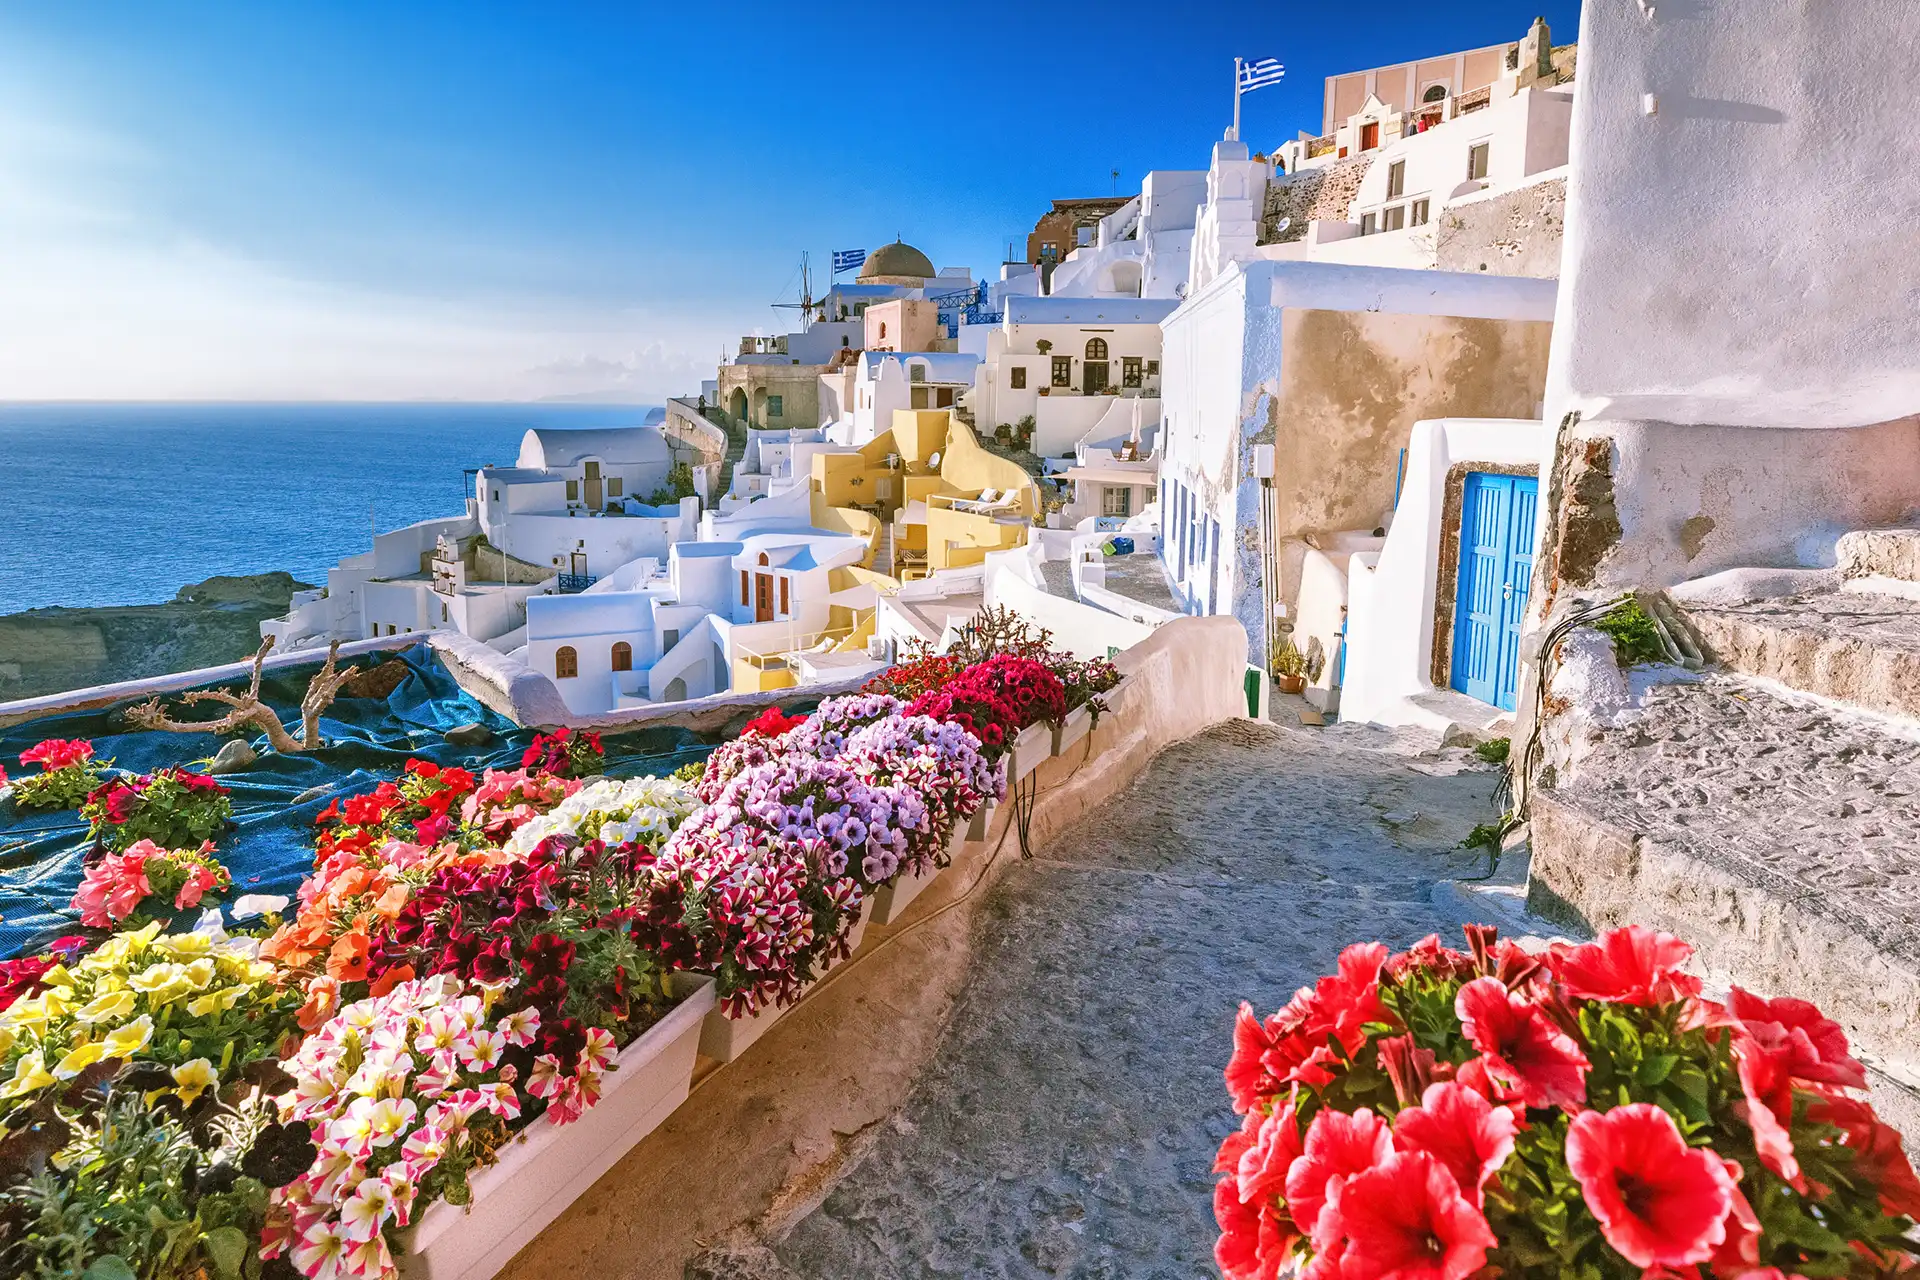 Scenic view of traditional cycladic houses on small street with flowers in foreground, Oia village, Santorini, Greece. Sunset view point. Holidays ... See More